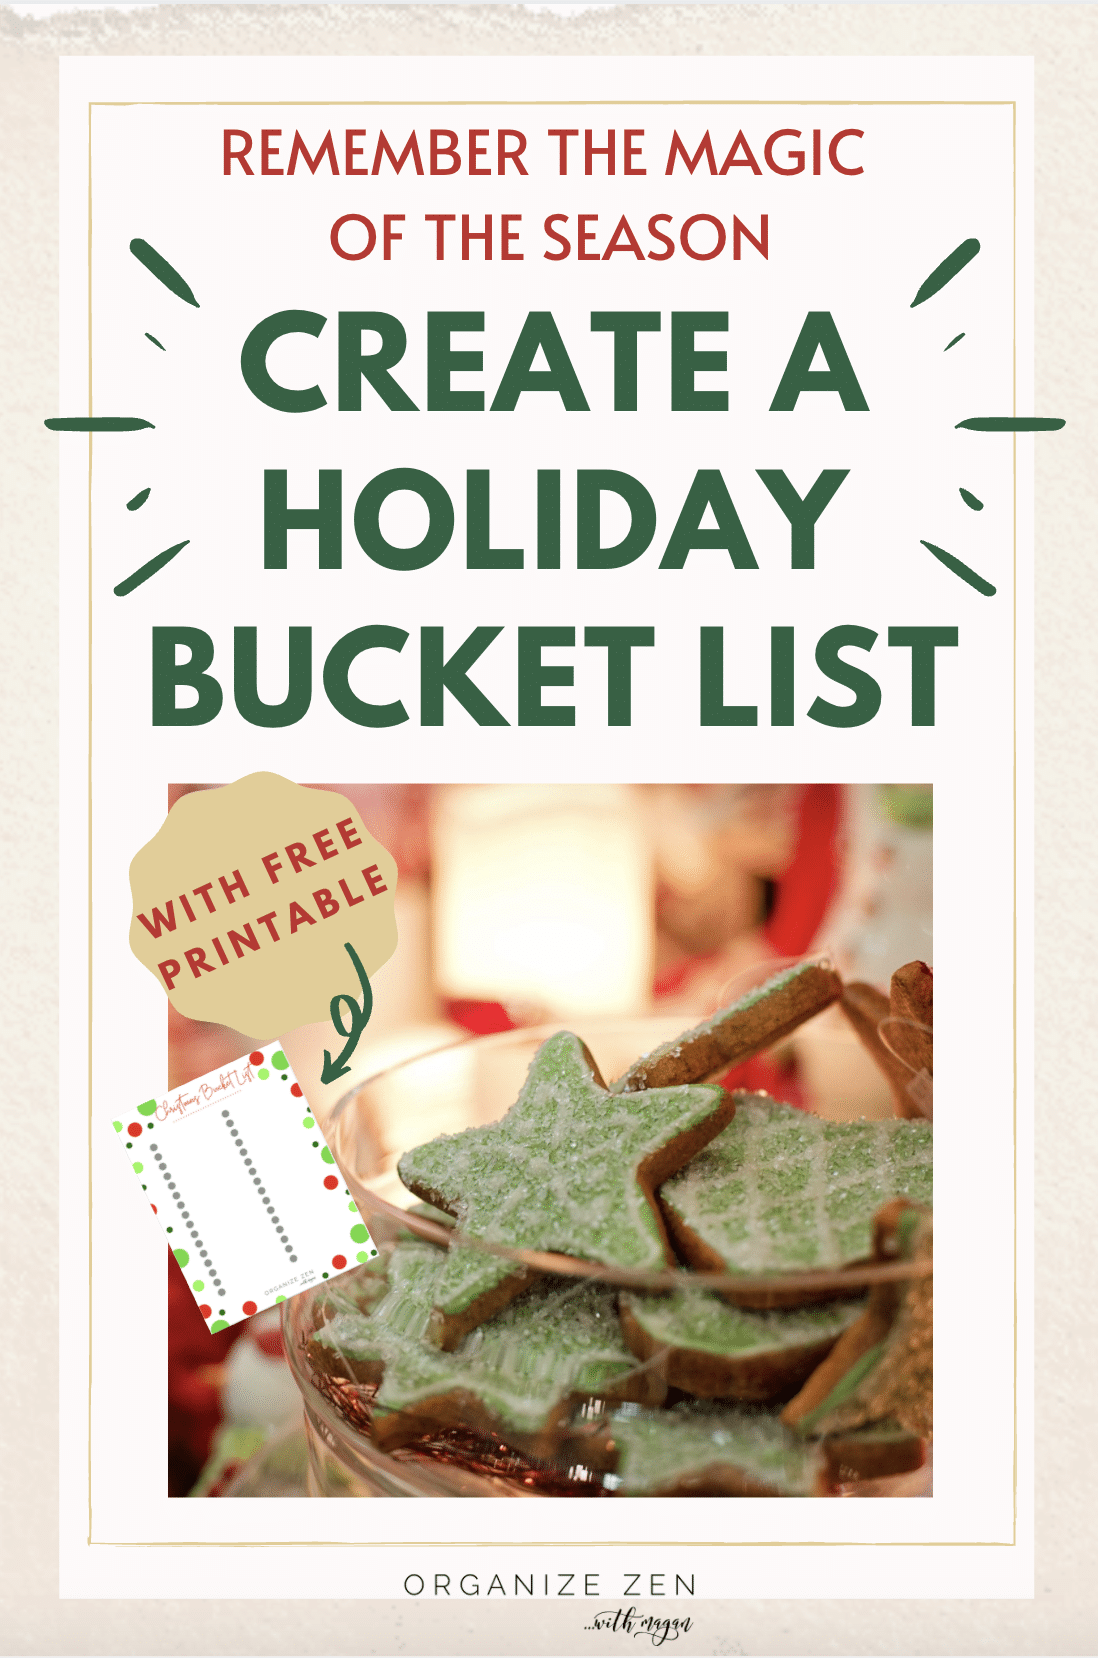 How to Create a Holiday Bucket List